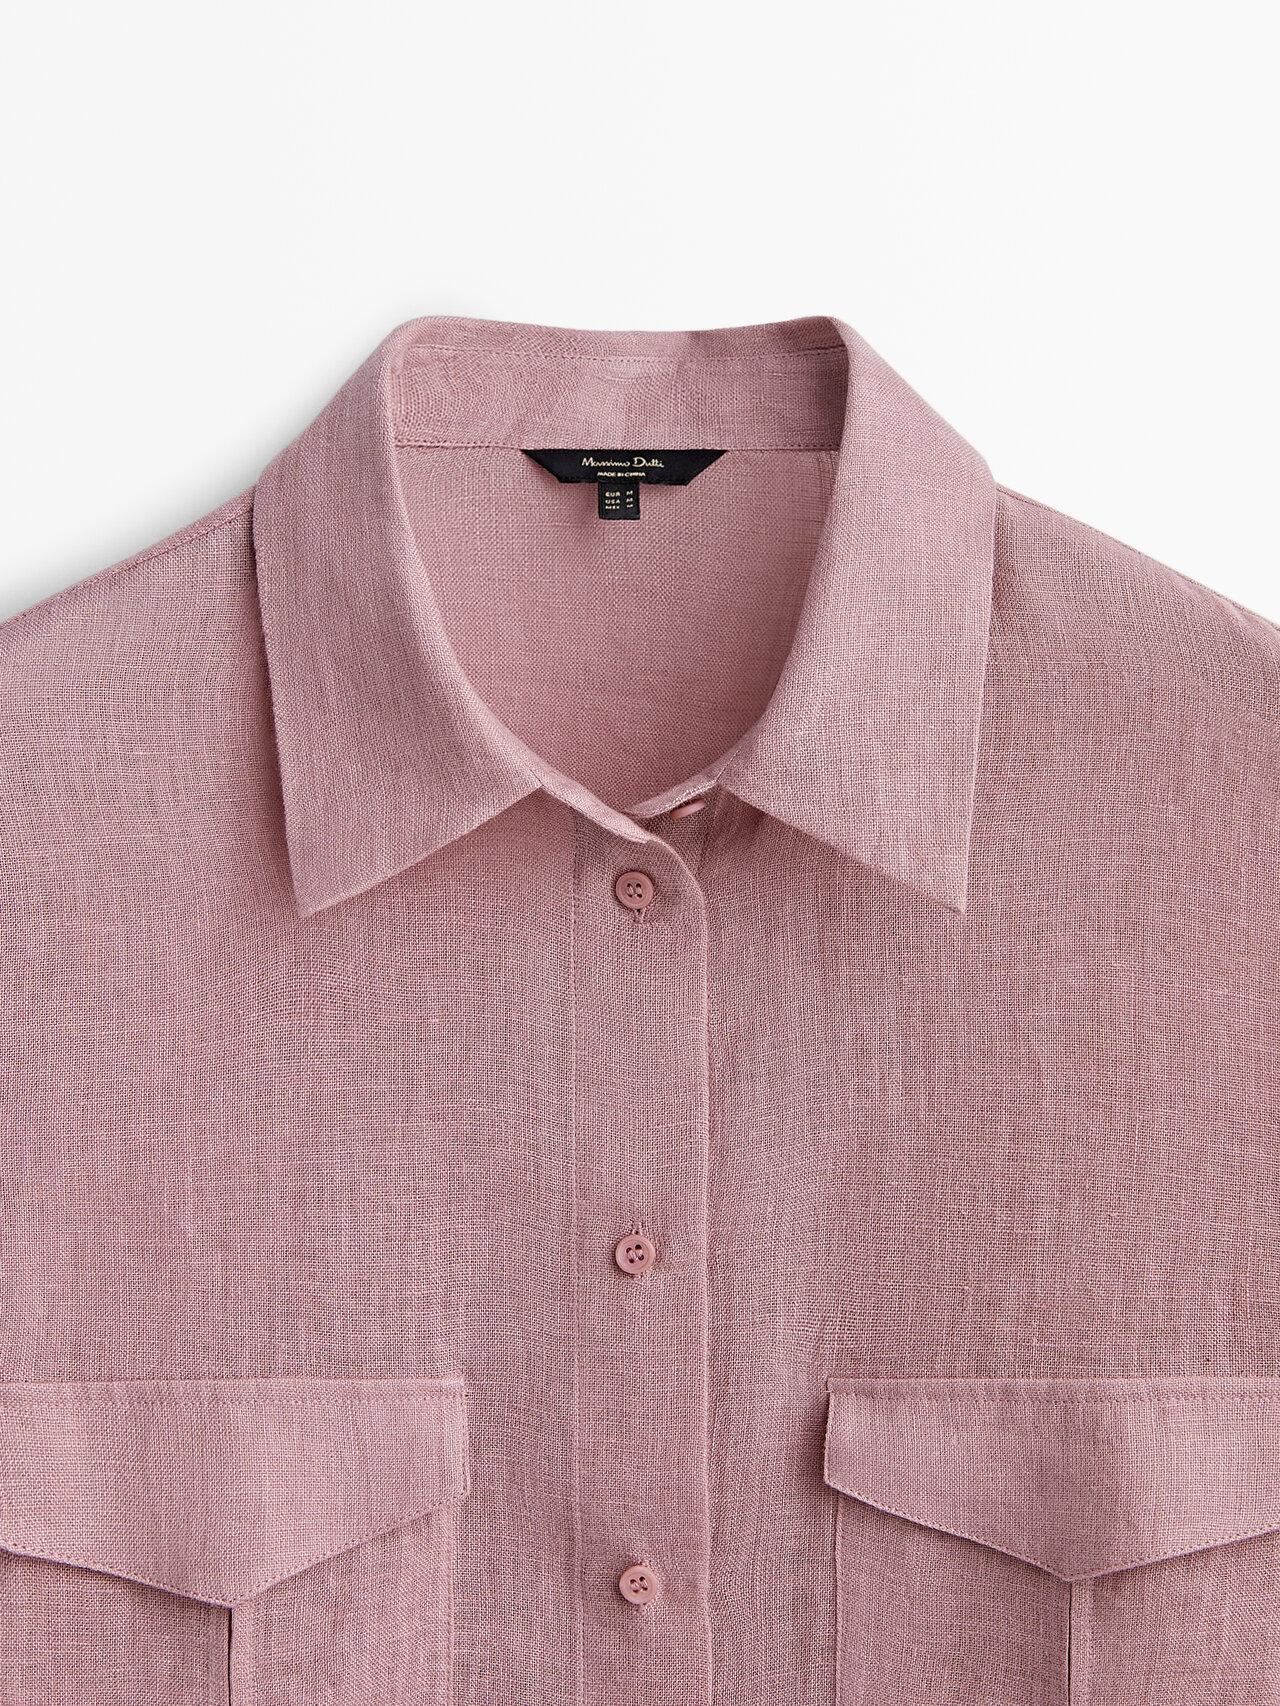 MASSIMO DUTTI 100% Linen Shirt With Pockets in Pink | Lyst